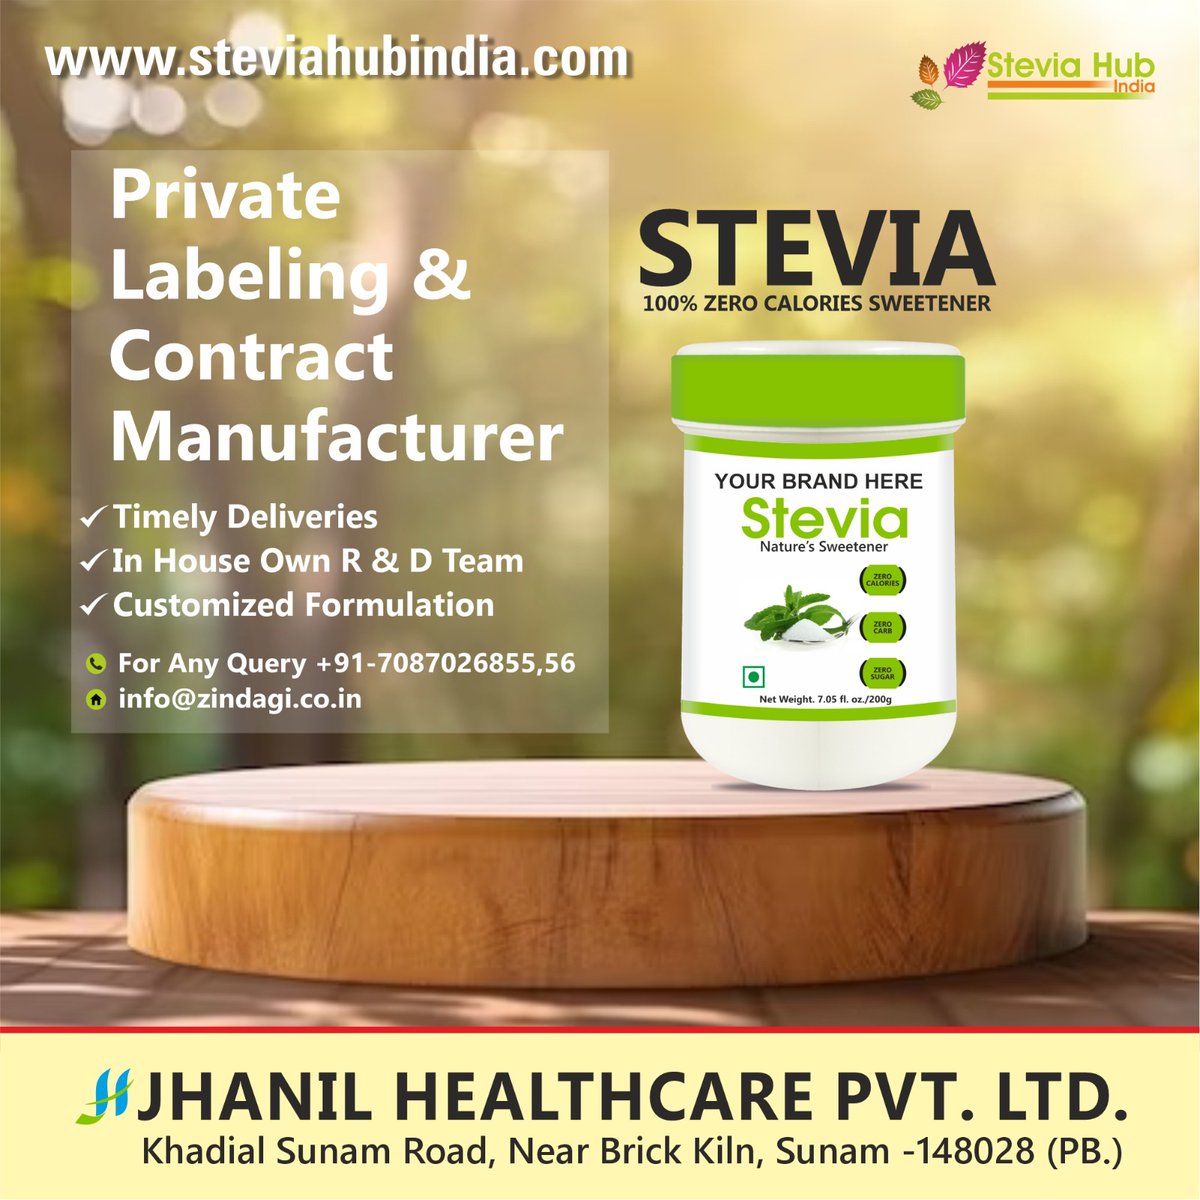 Stevia Hub India - Empower innovation through collaborative third-party manufacturing for superior #stevia products and streamlined processes. 

Contact us on 7087026856,51
Mail id: vakul@zindagi.co.in

#stevia #steviapowder #zerocalorie #sweetener #natural #steviadrops